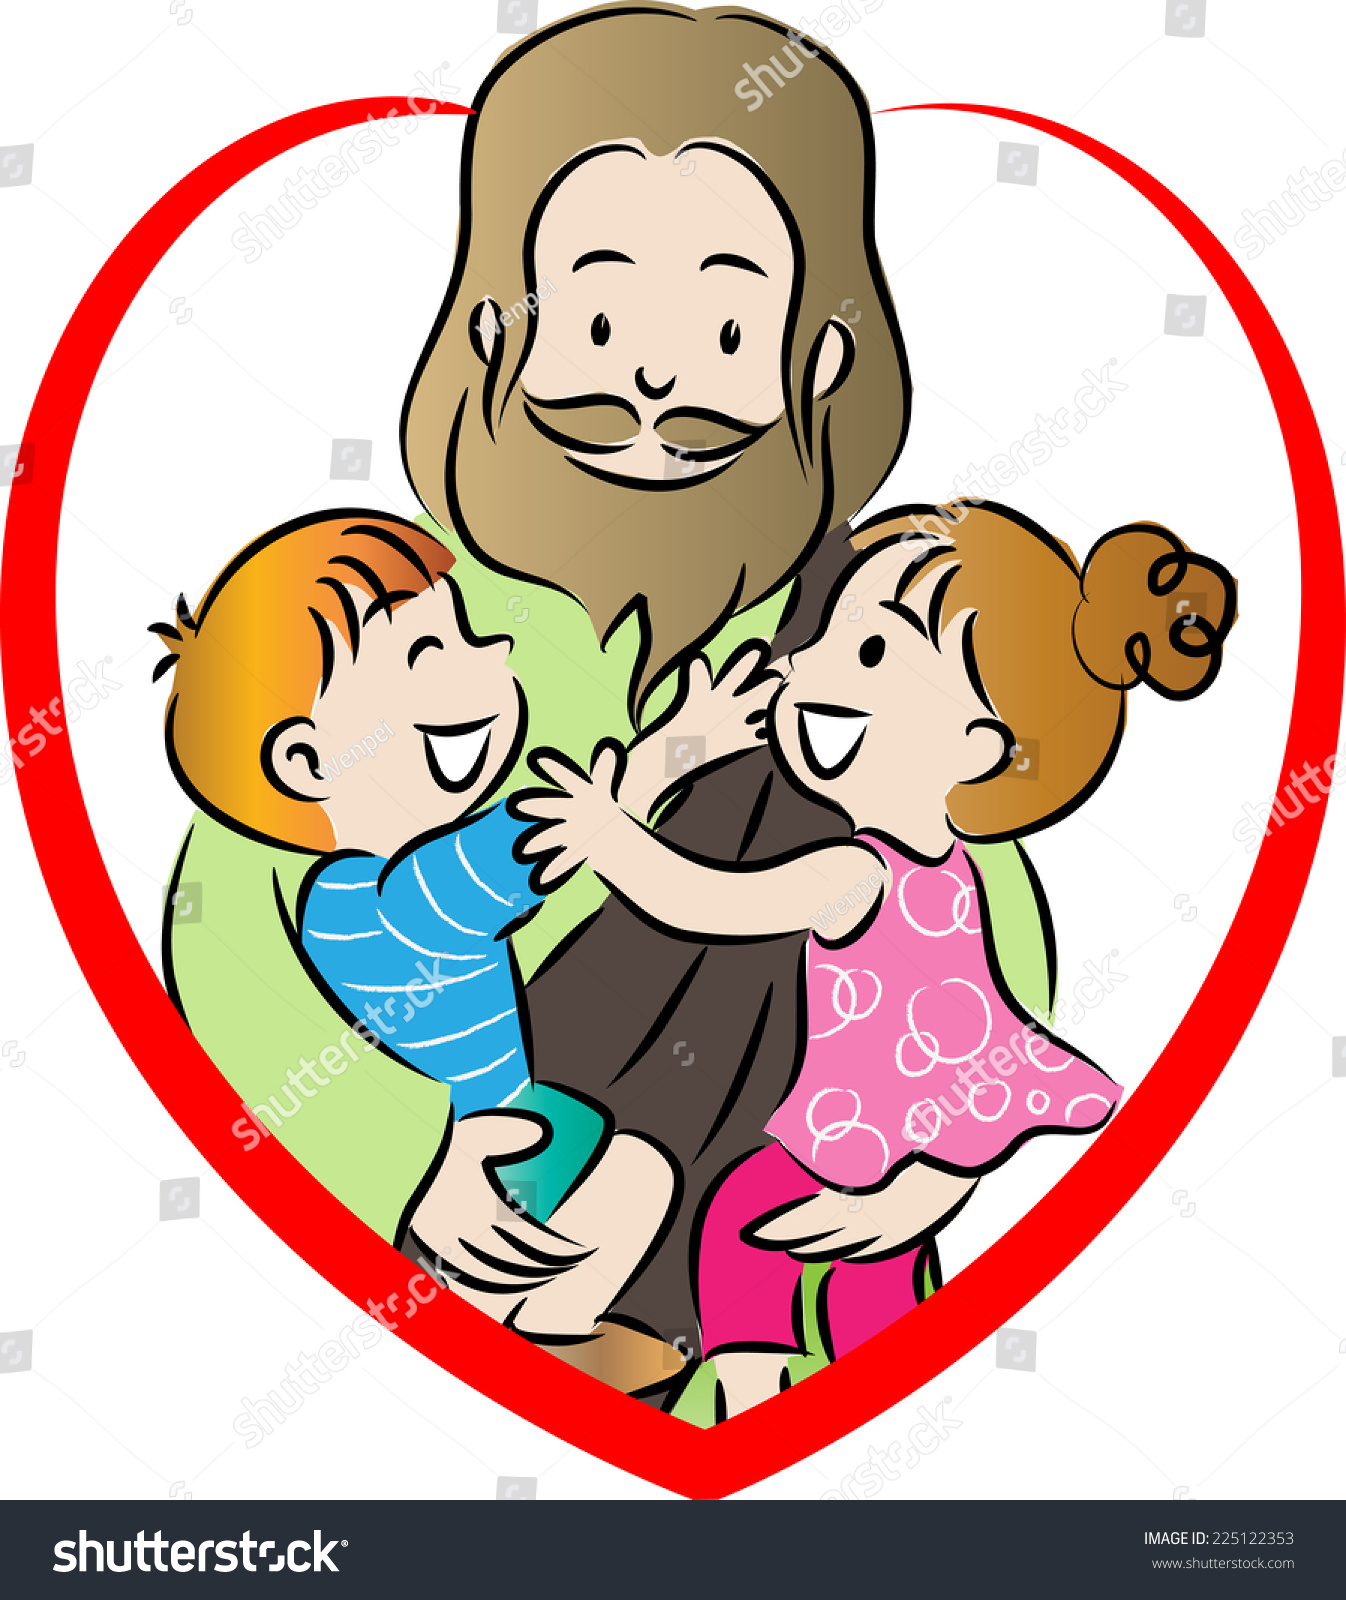 clipart jesus with child - photo #47